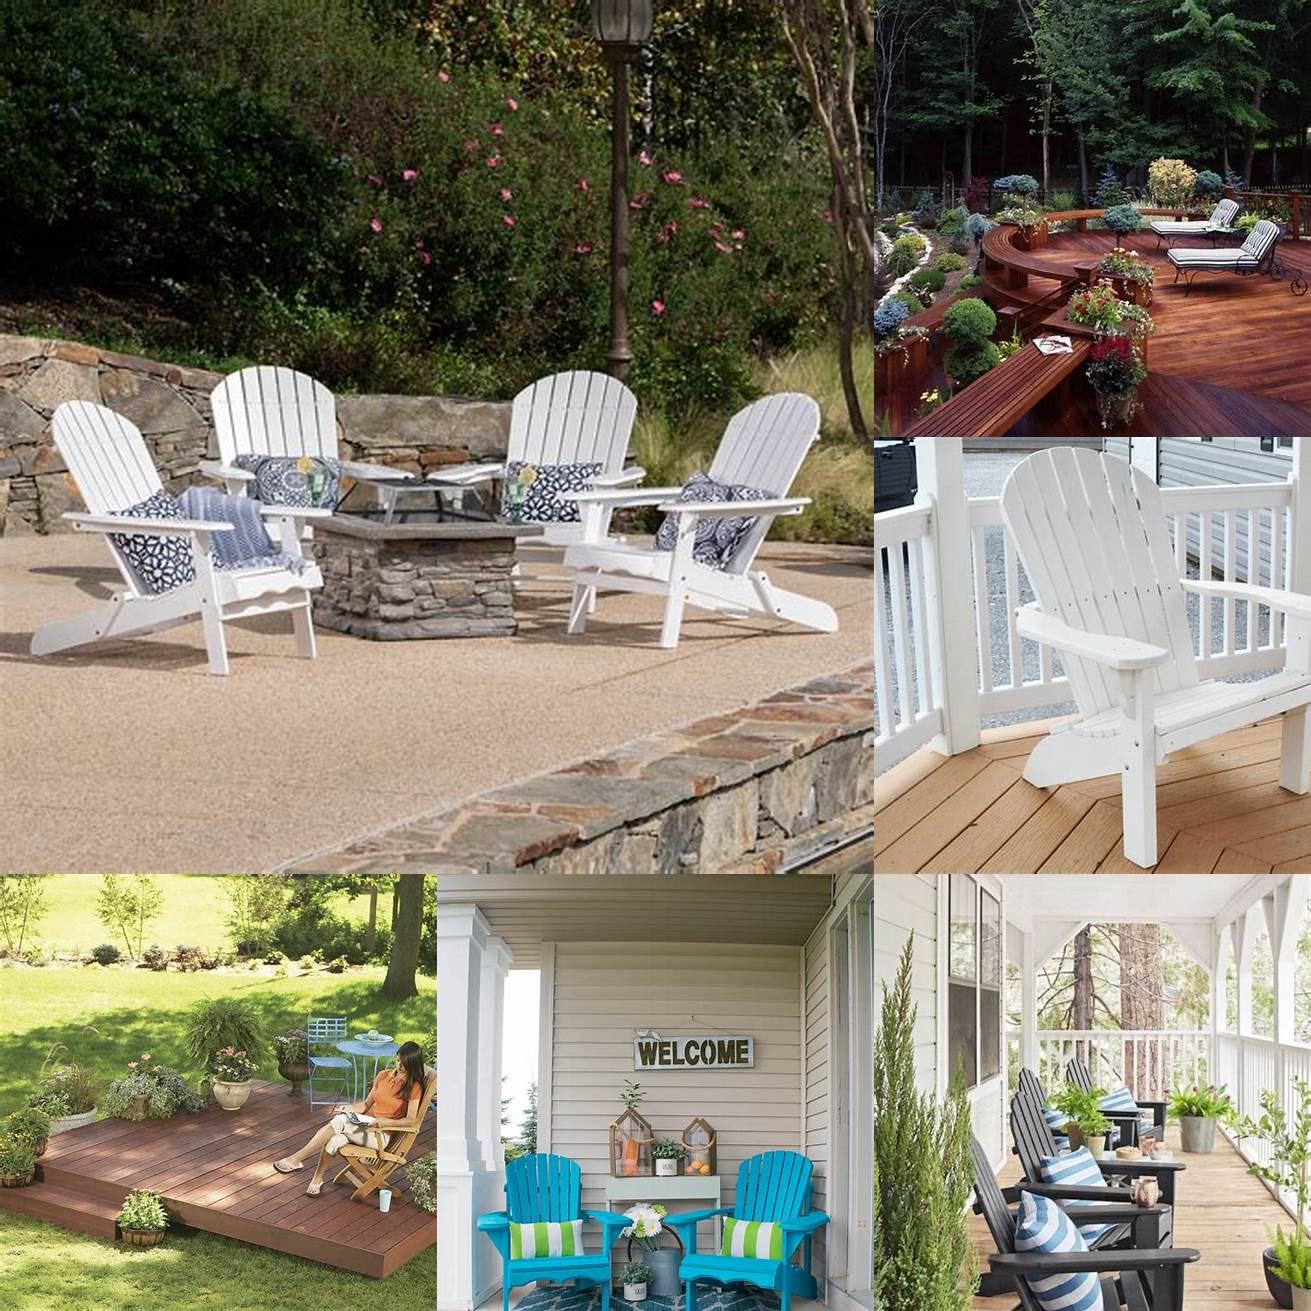 Deck - Create a relaxing lounge area on your deck with white Adirondack chairs and a matching side table